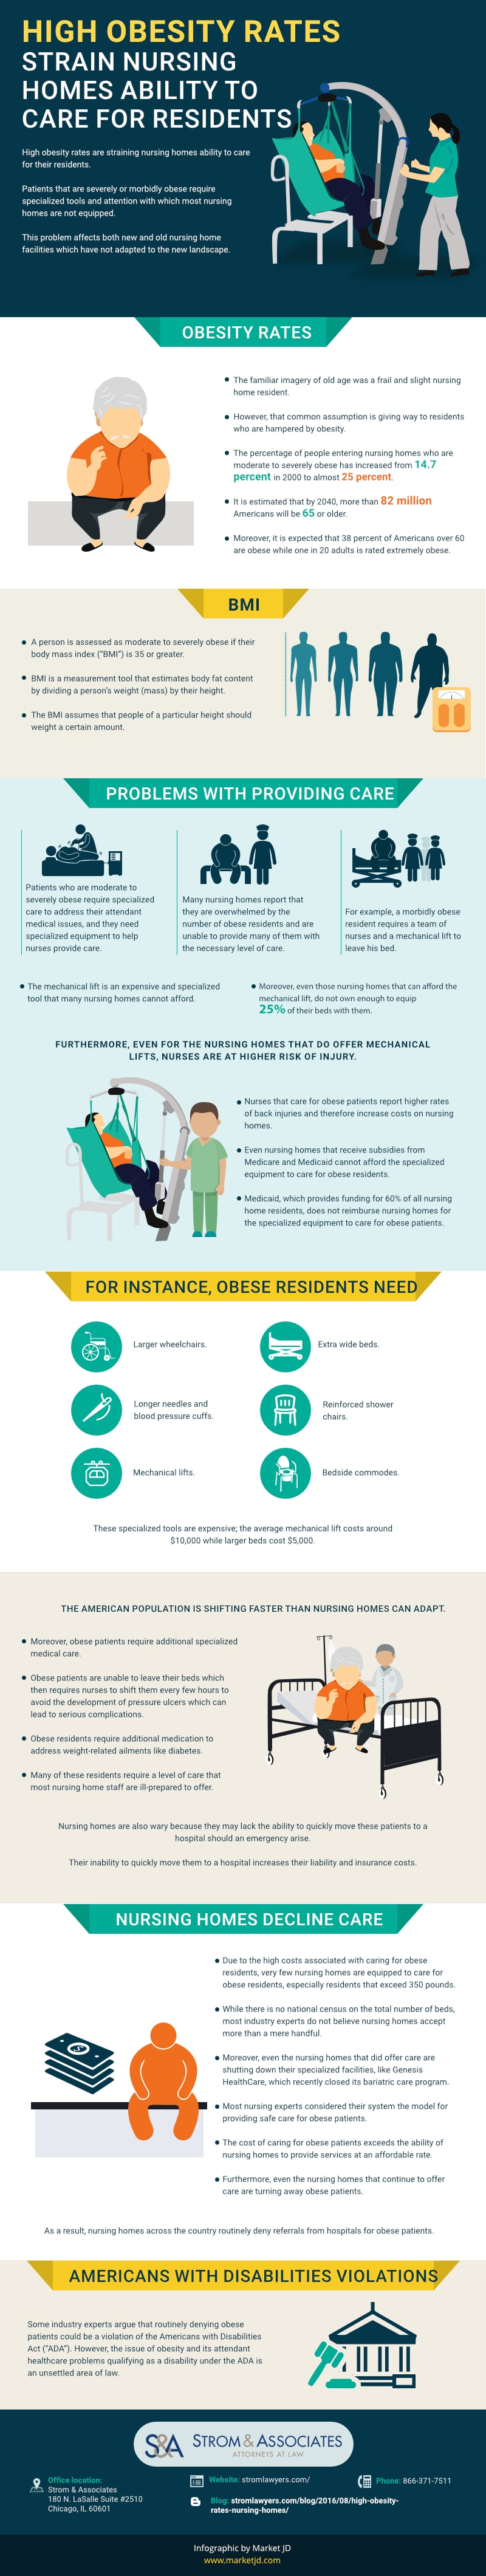 High obesity rates infographic